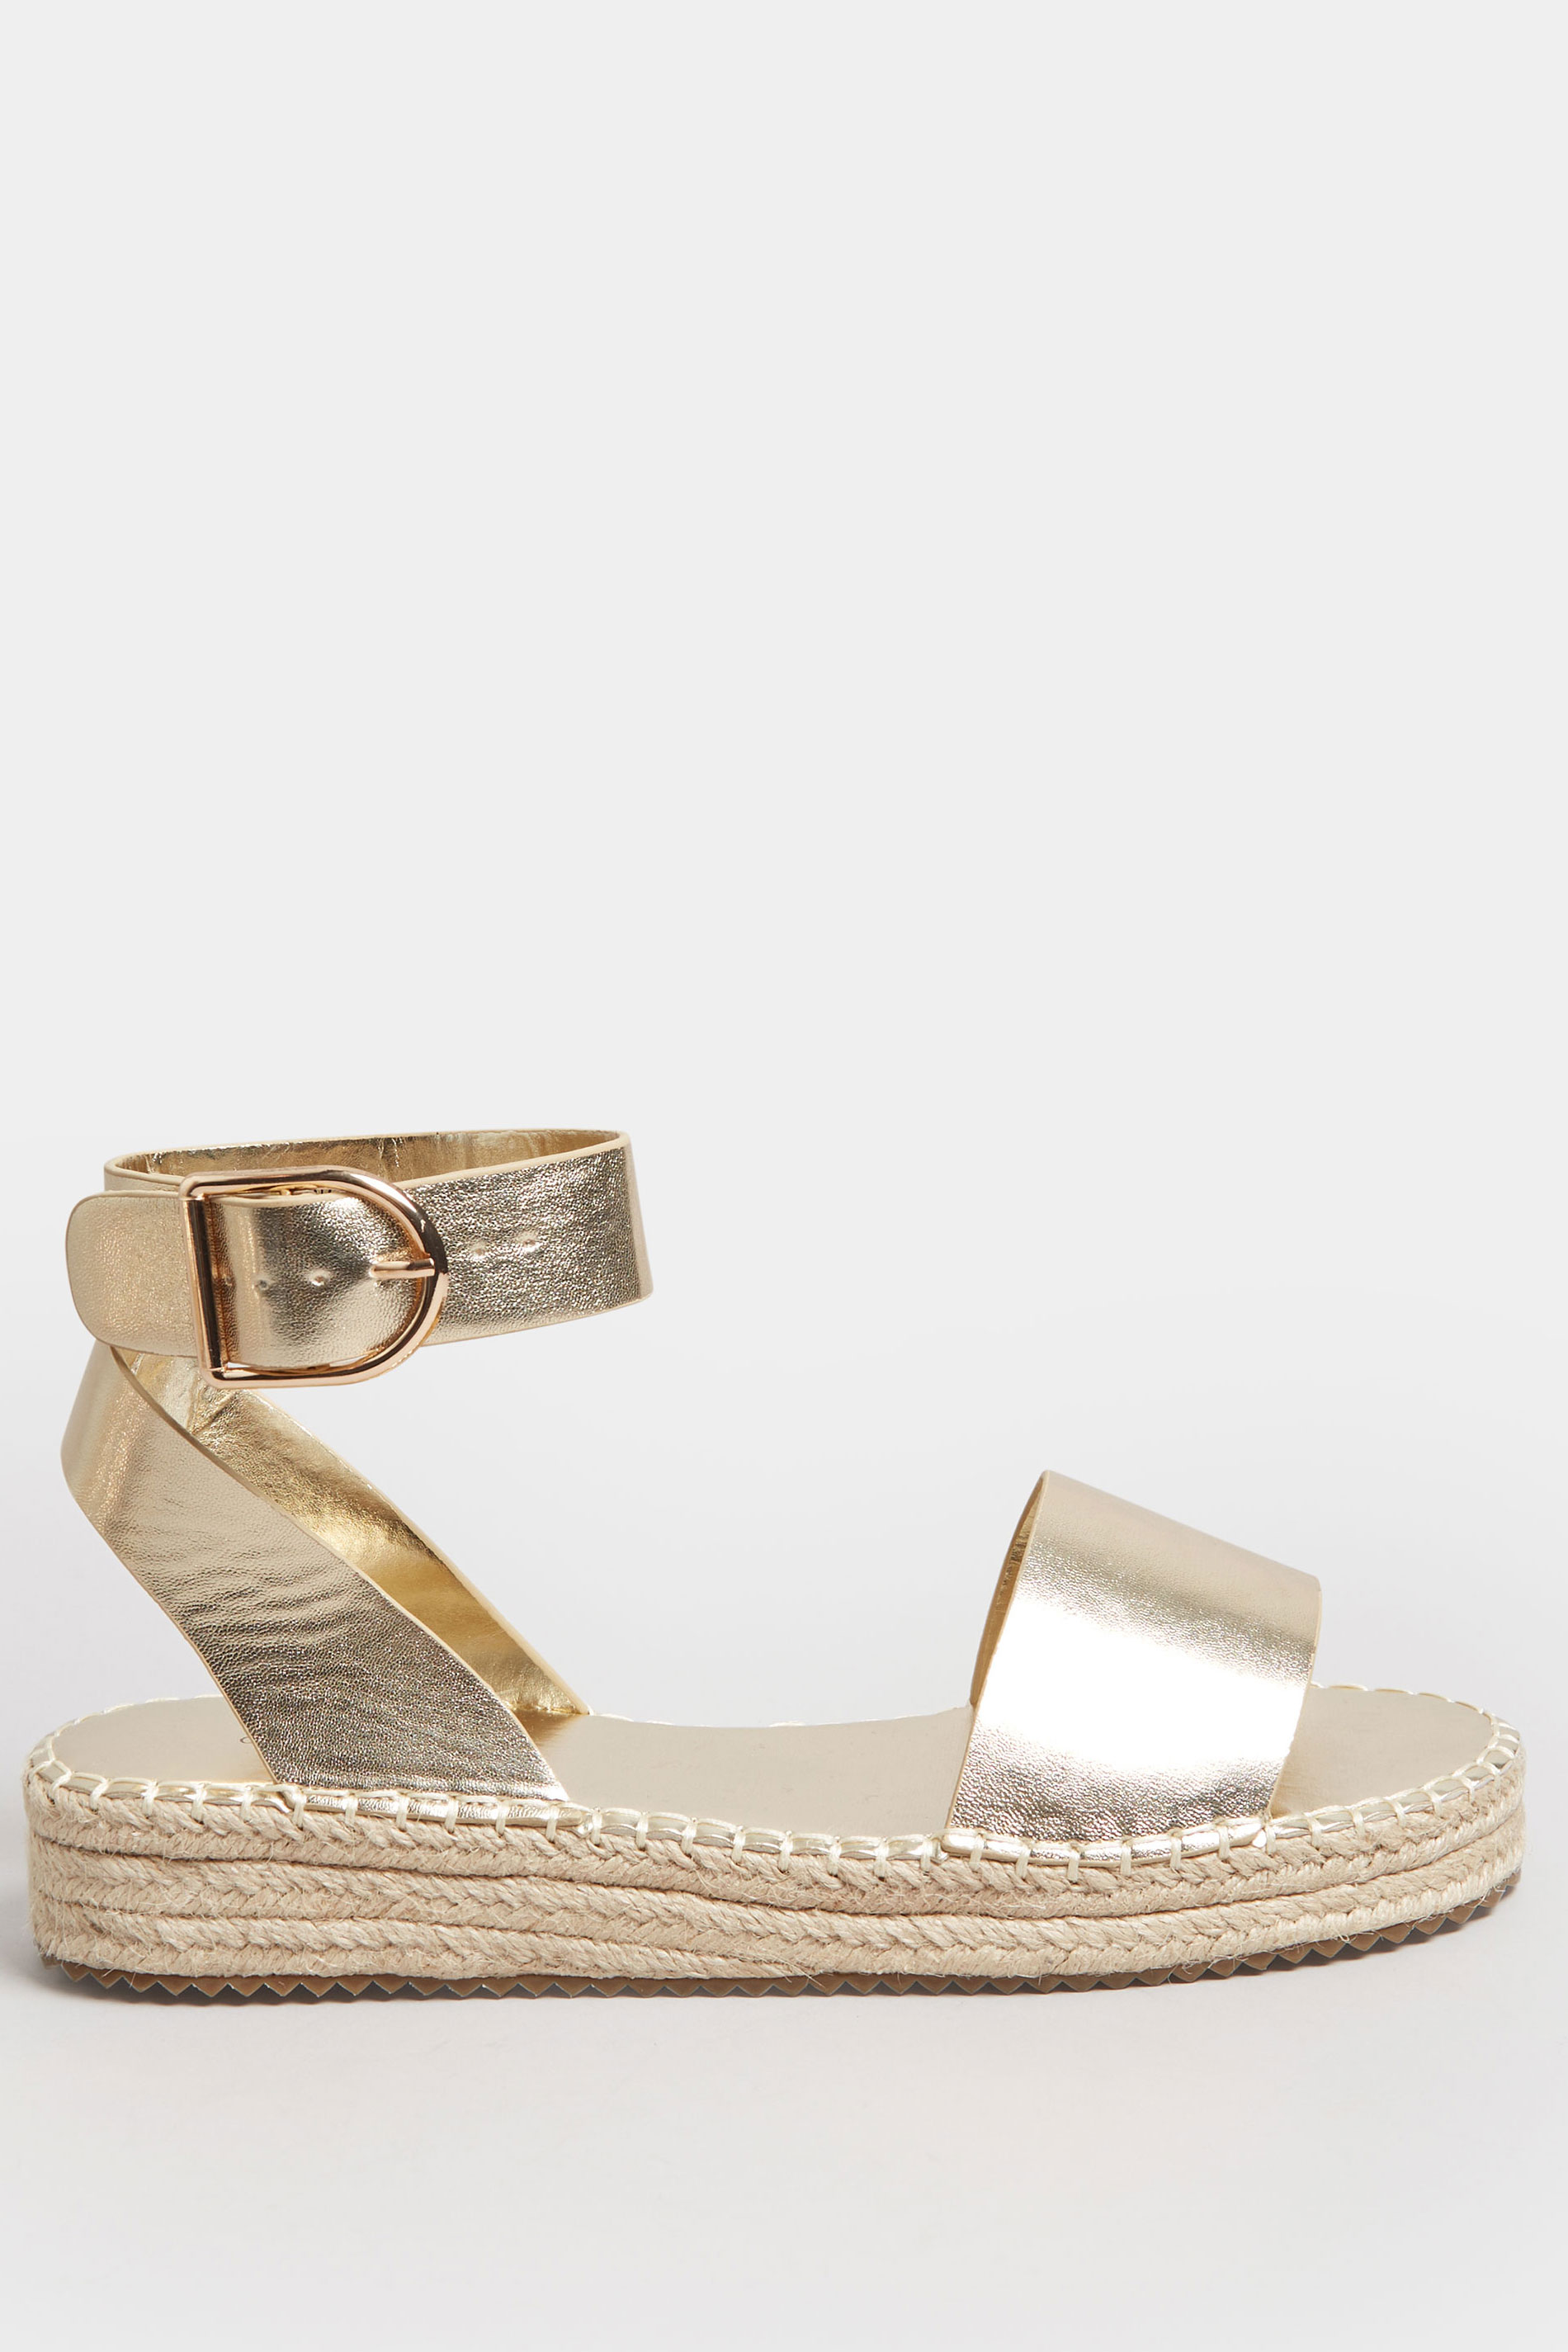 LIMITED COLLECTION Gold Flatform Espadrilles In Extra Wide EEE Fit | Yours Clothing 3